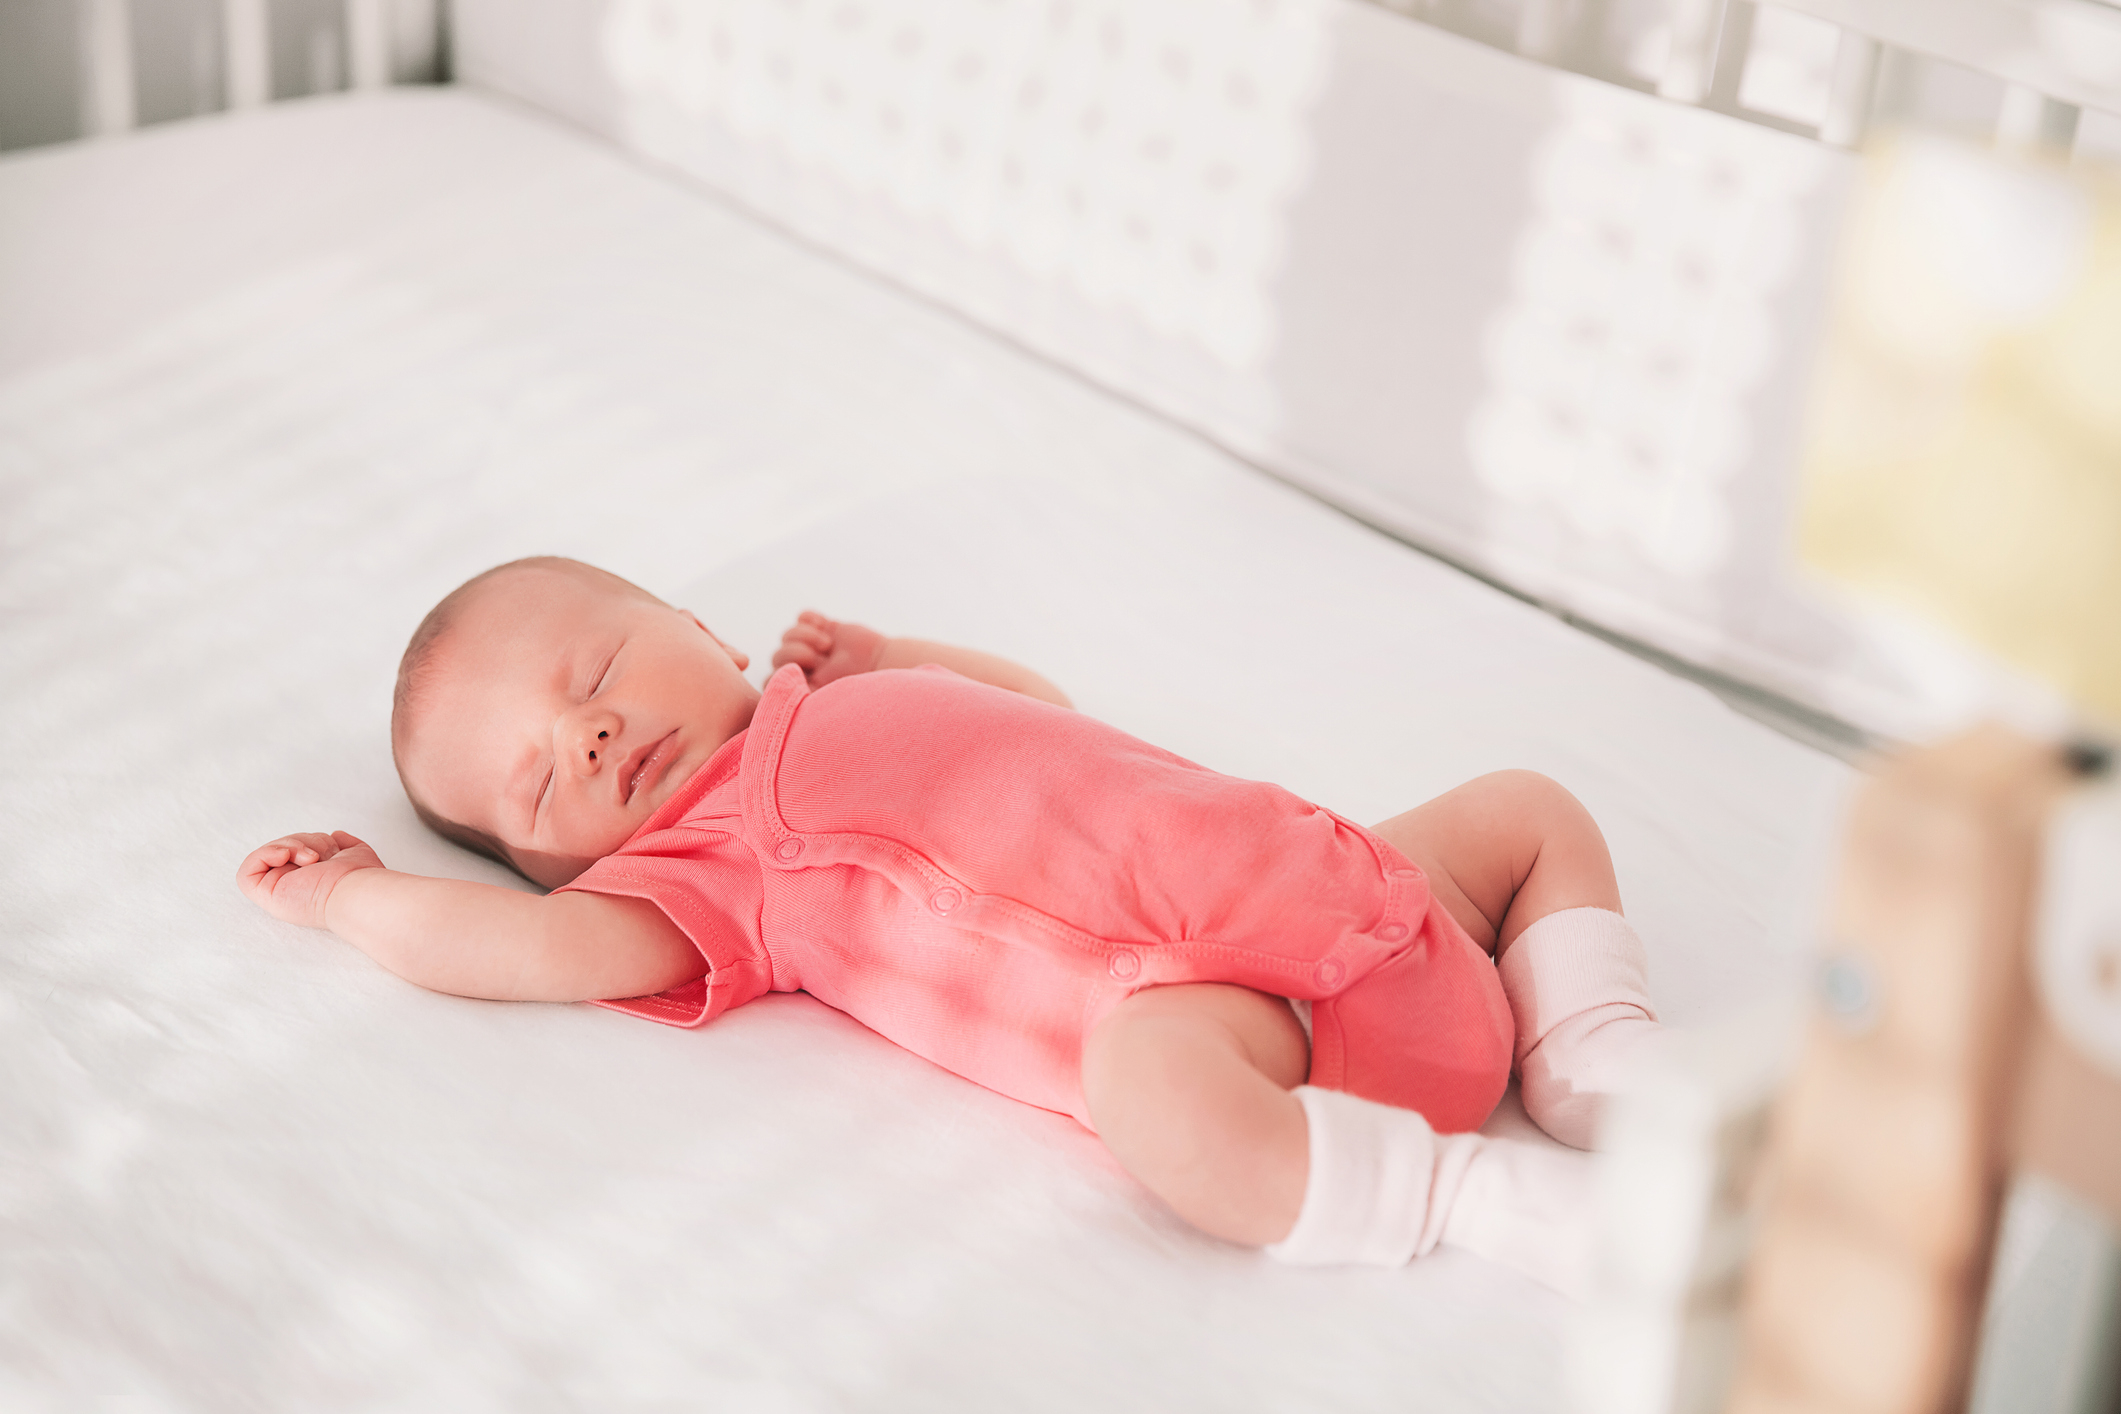 Infant sleeping peacefully on a crib mattress, dressed in a plain onesie